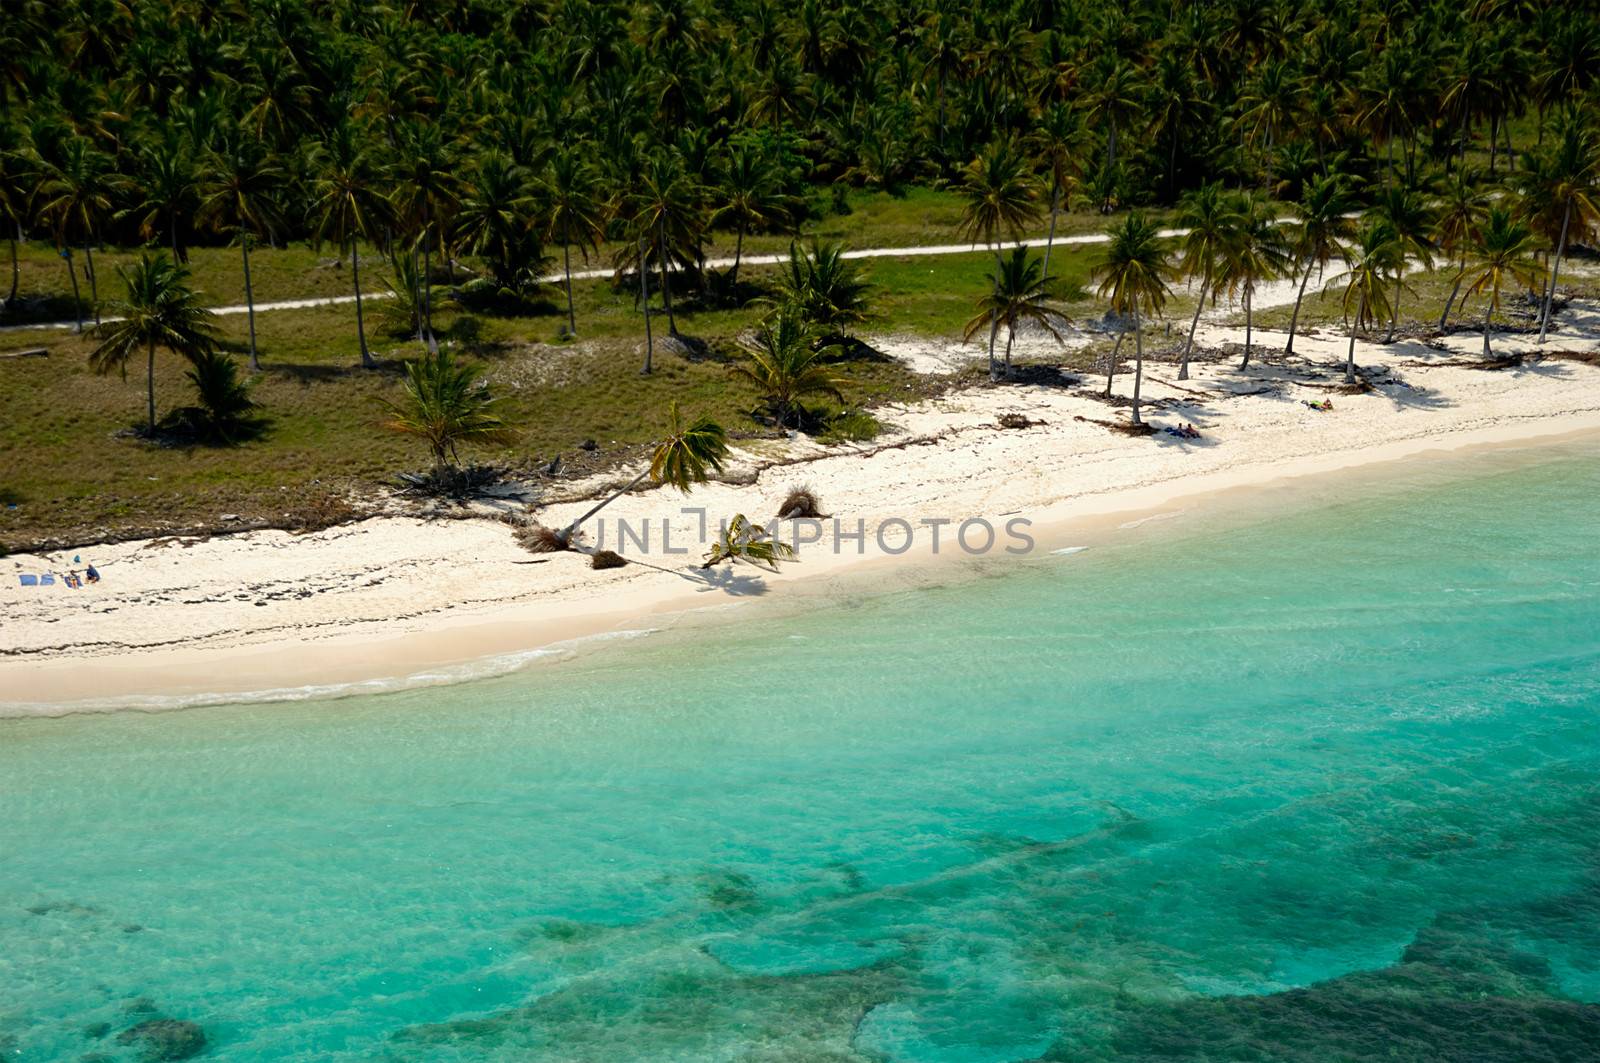 A beutiful beach in the caribbean. Taken form helicopter, Dominican Republic.